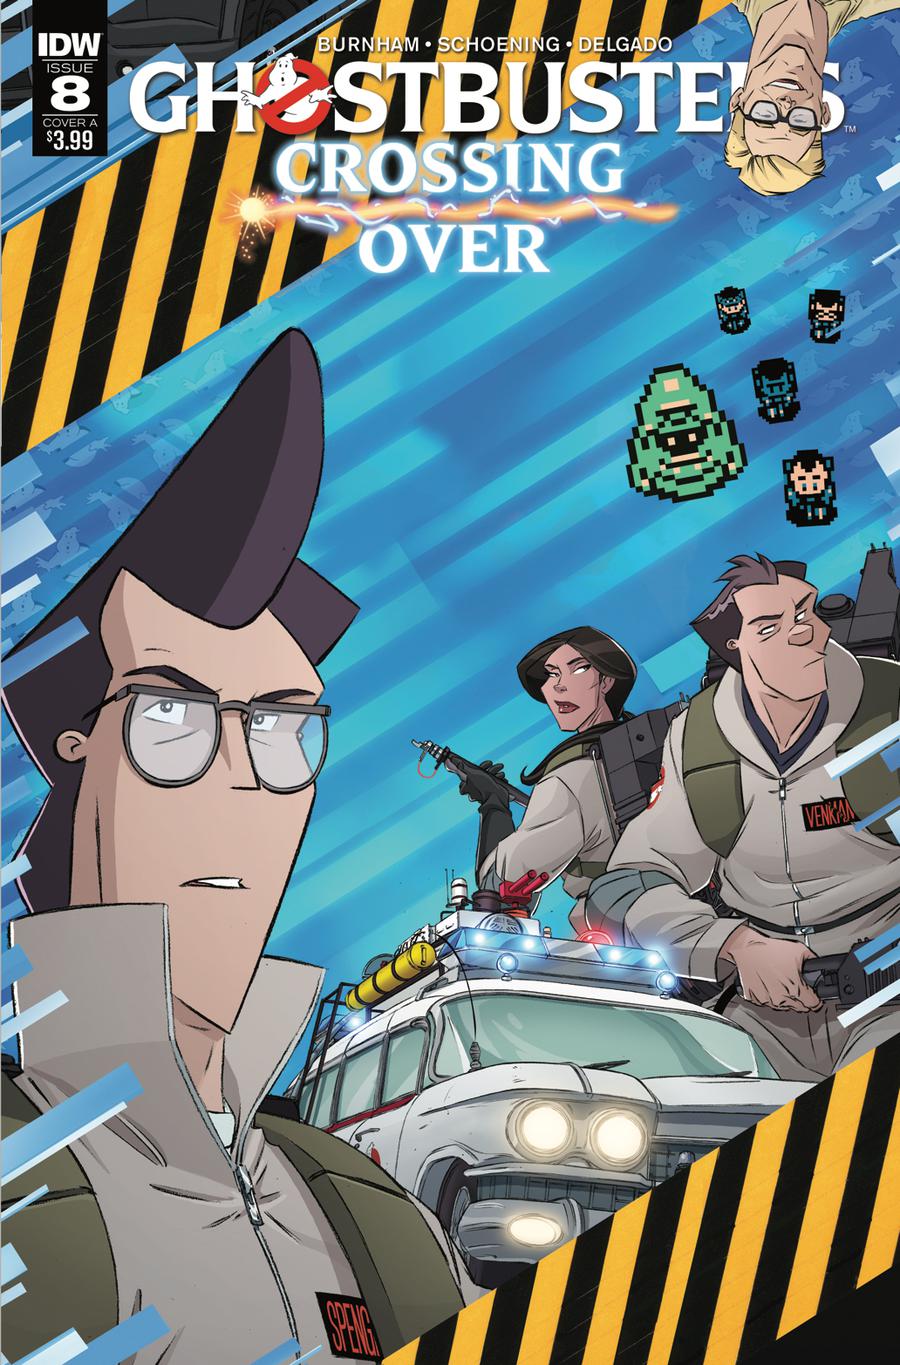 Ghostbusters Crossing Over #8 Cover A Regular Dan Schoening Cover